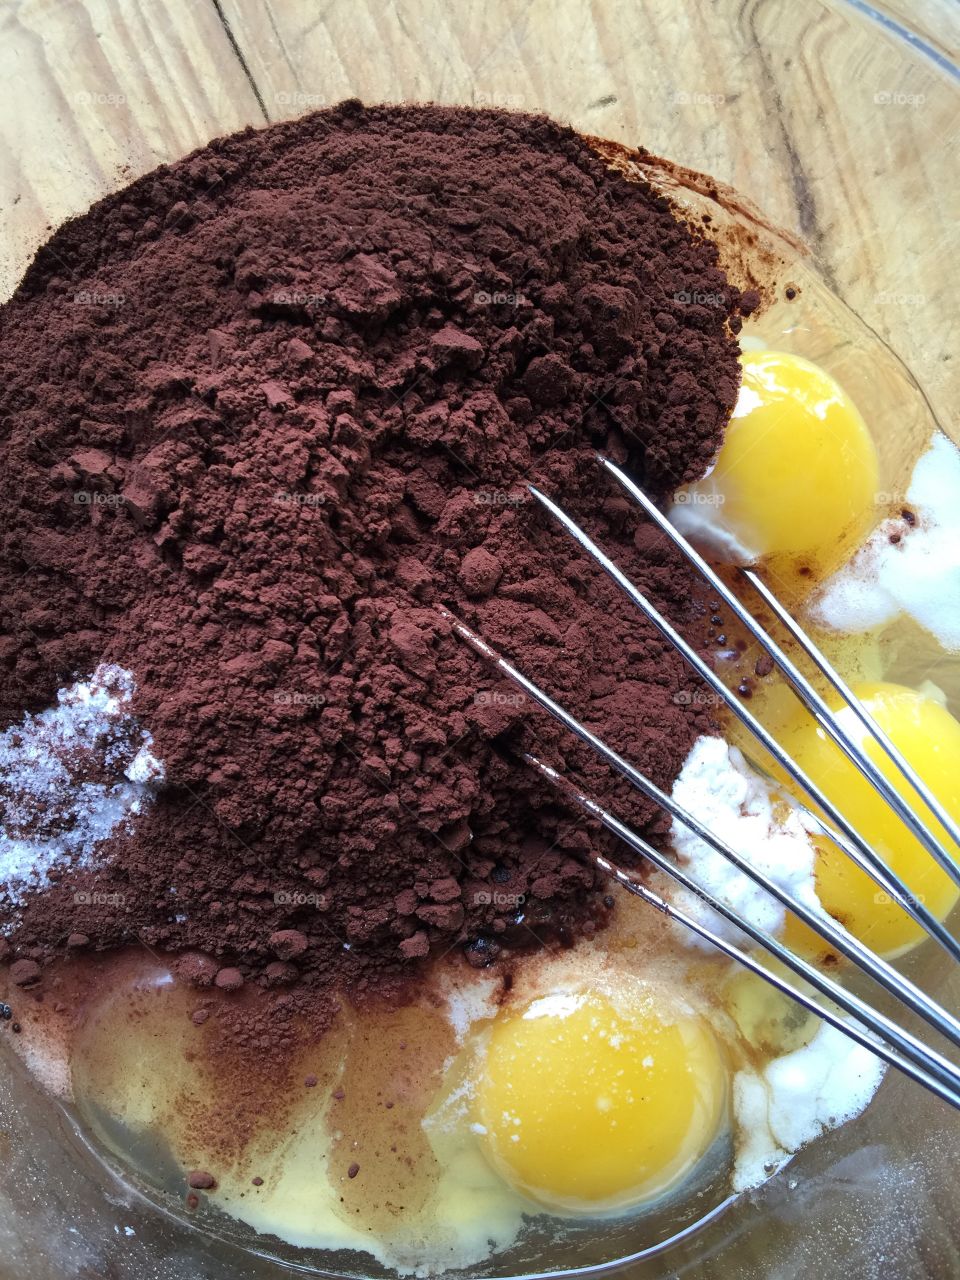 Mixing cocoa, flour and eggs